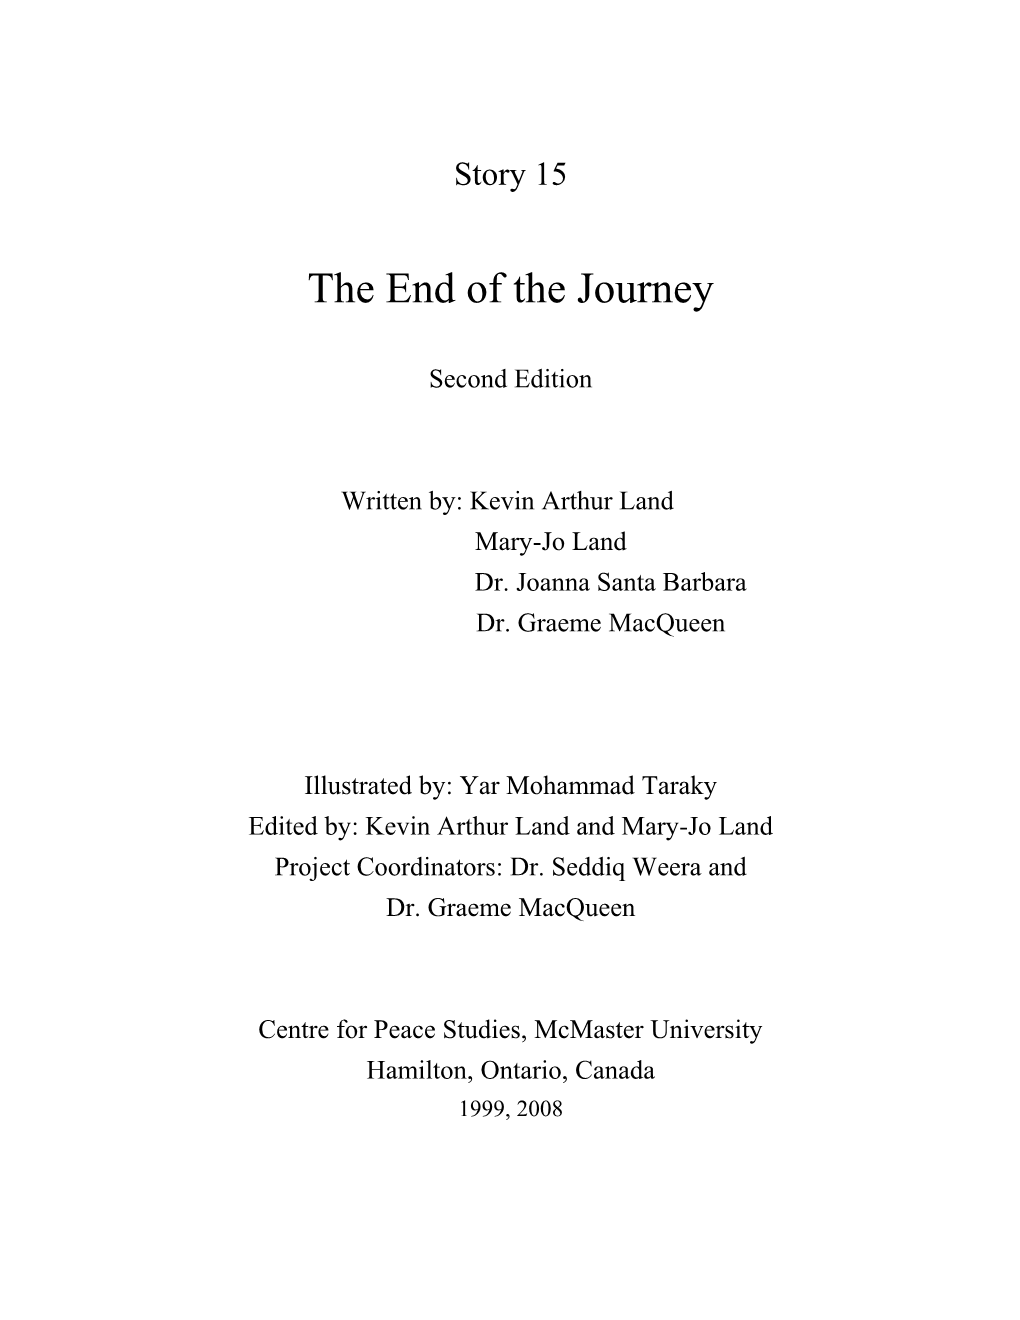 The End of the Journey